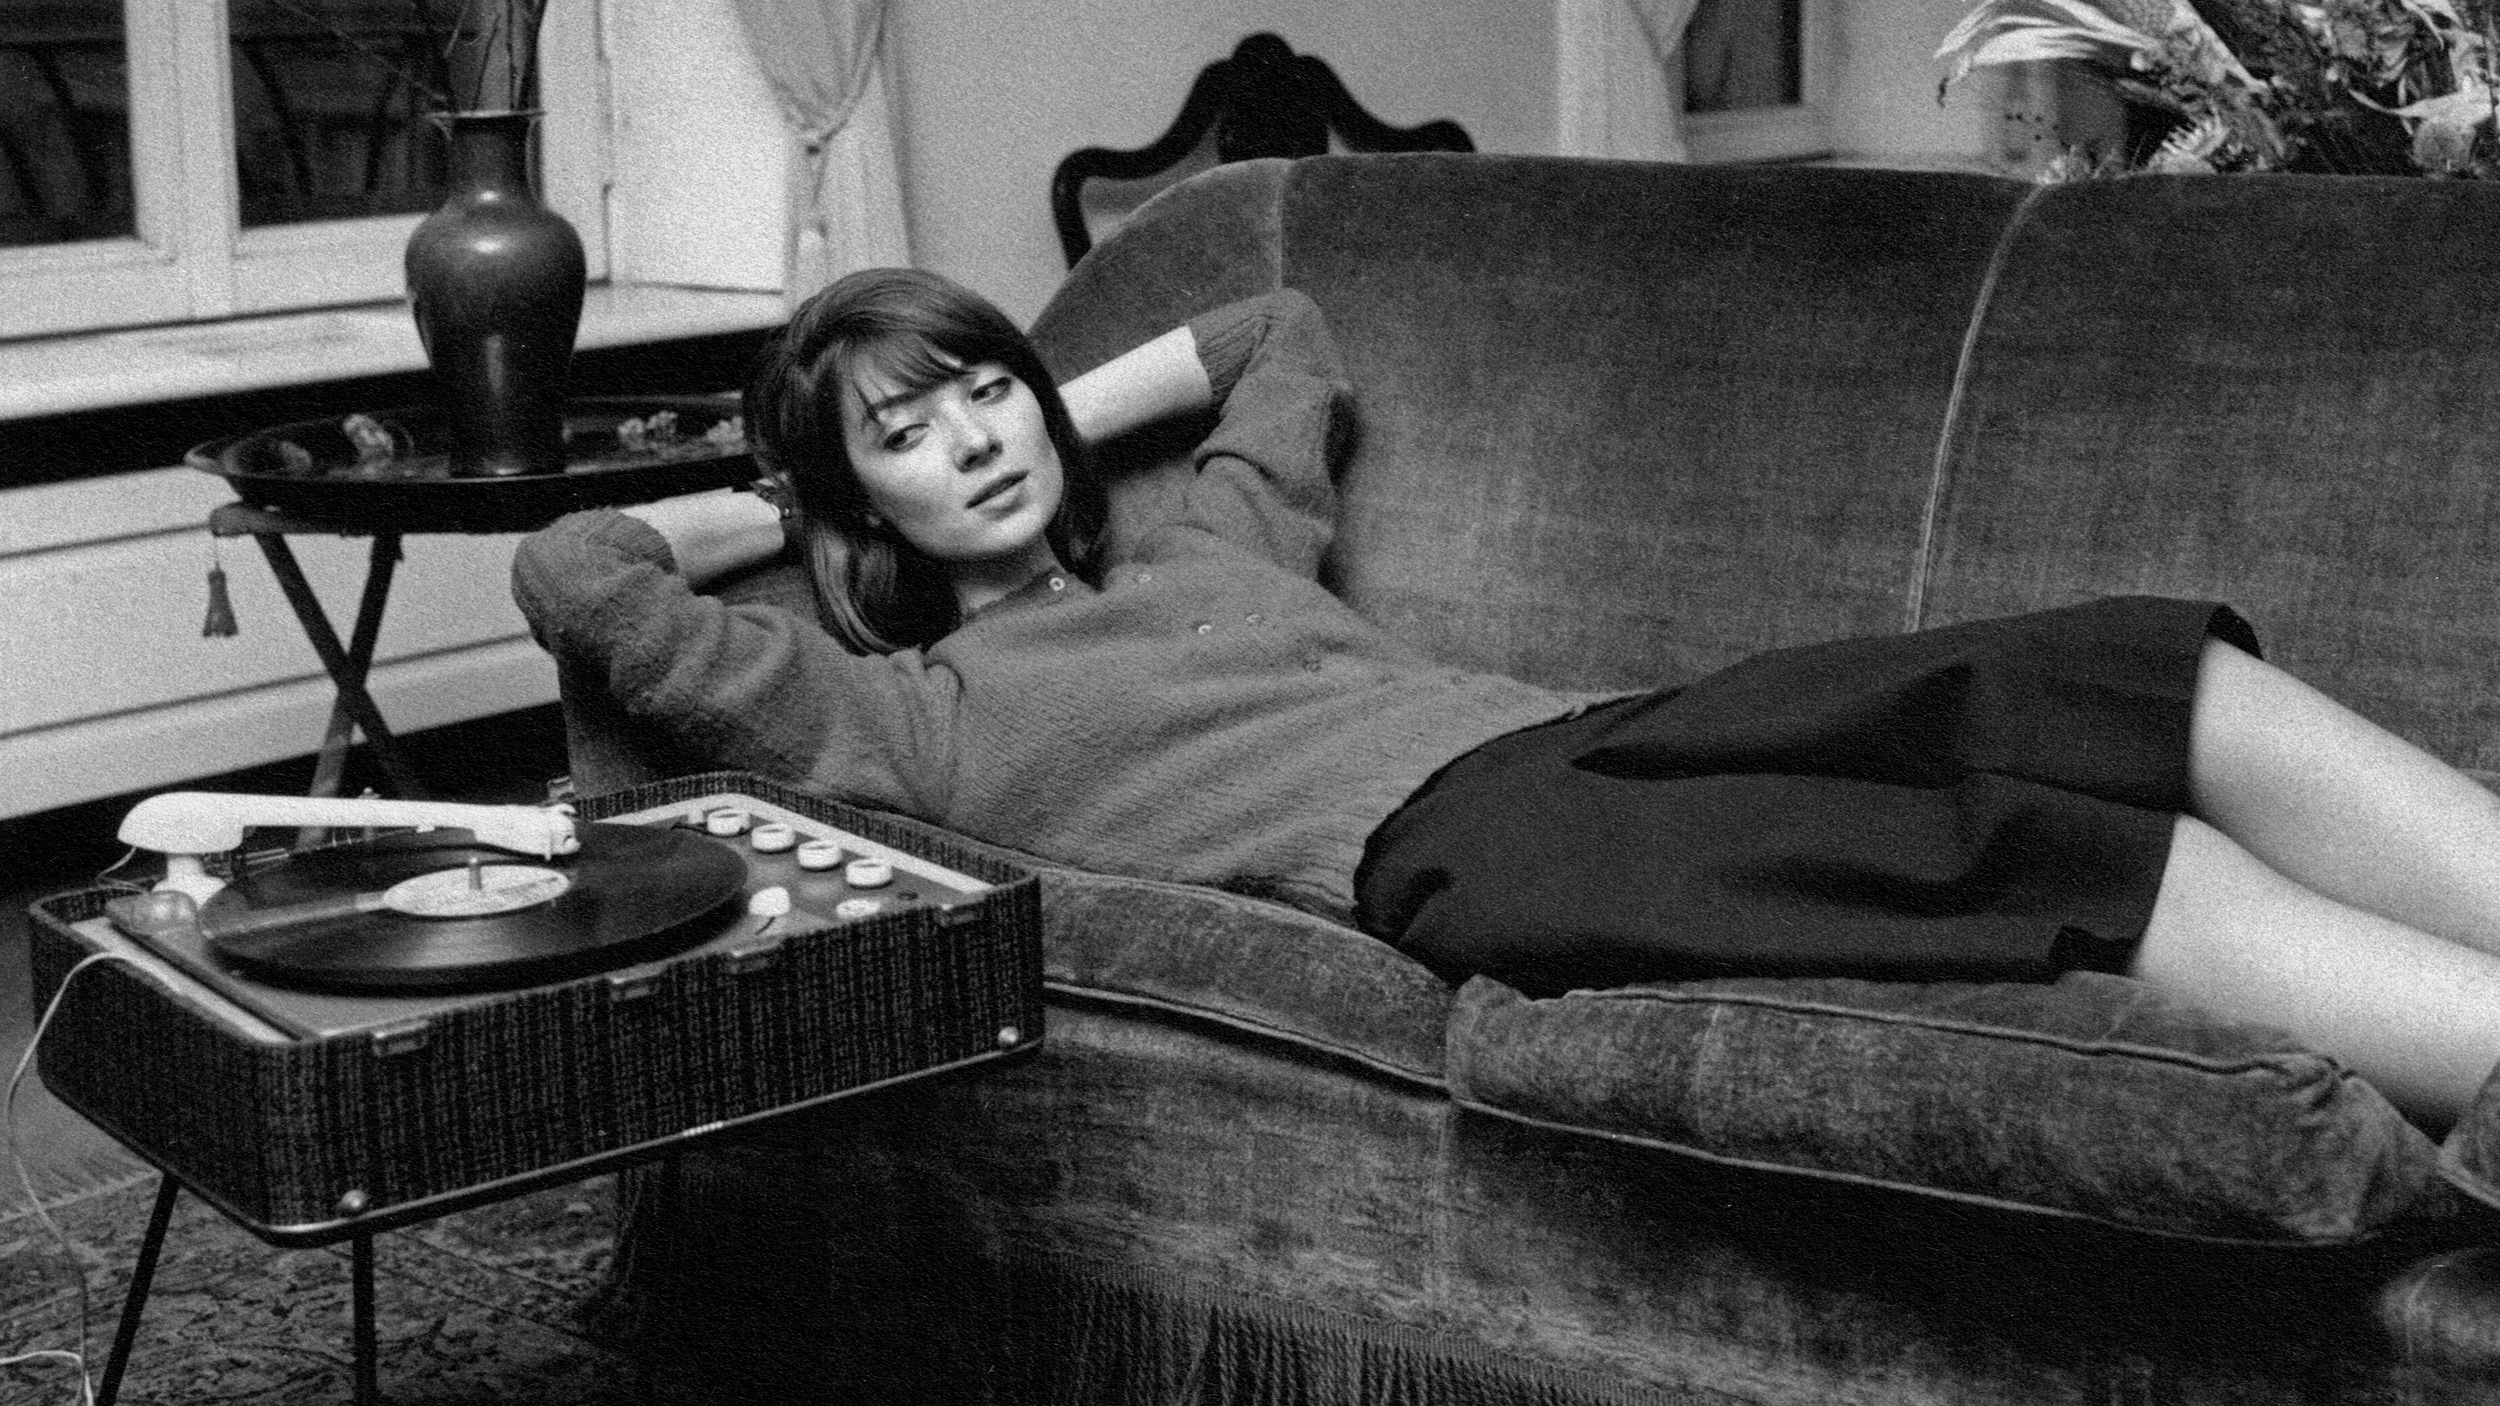 A woman with a music personality enjoying a record player on a couch.